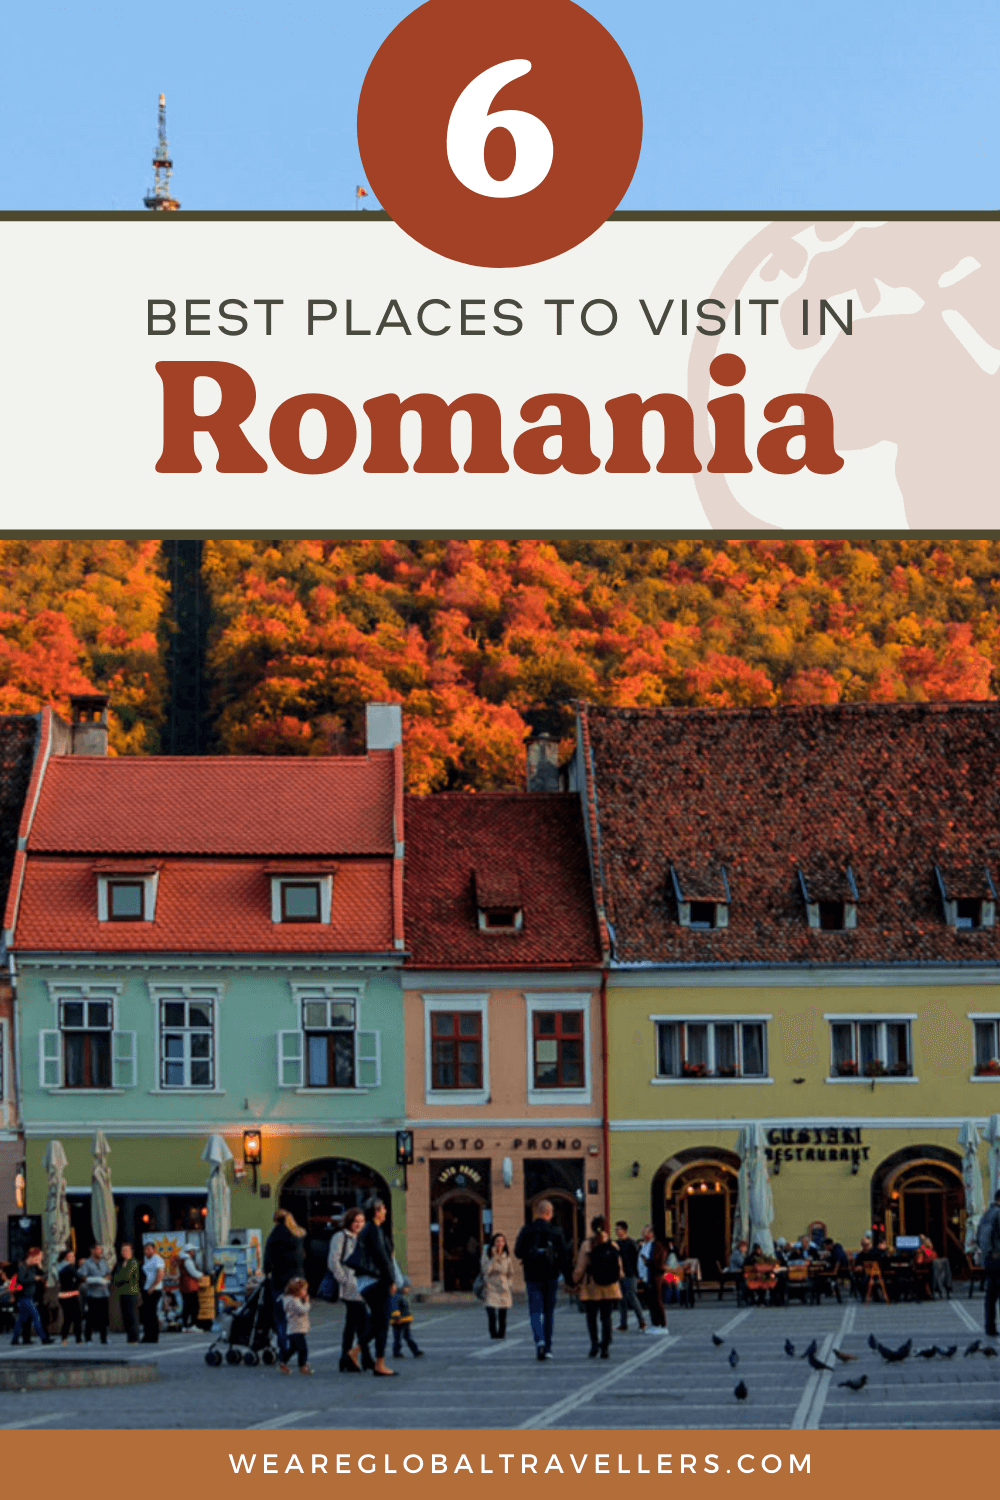 The best places to visit in Romania